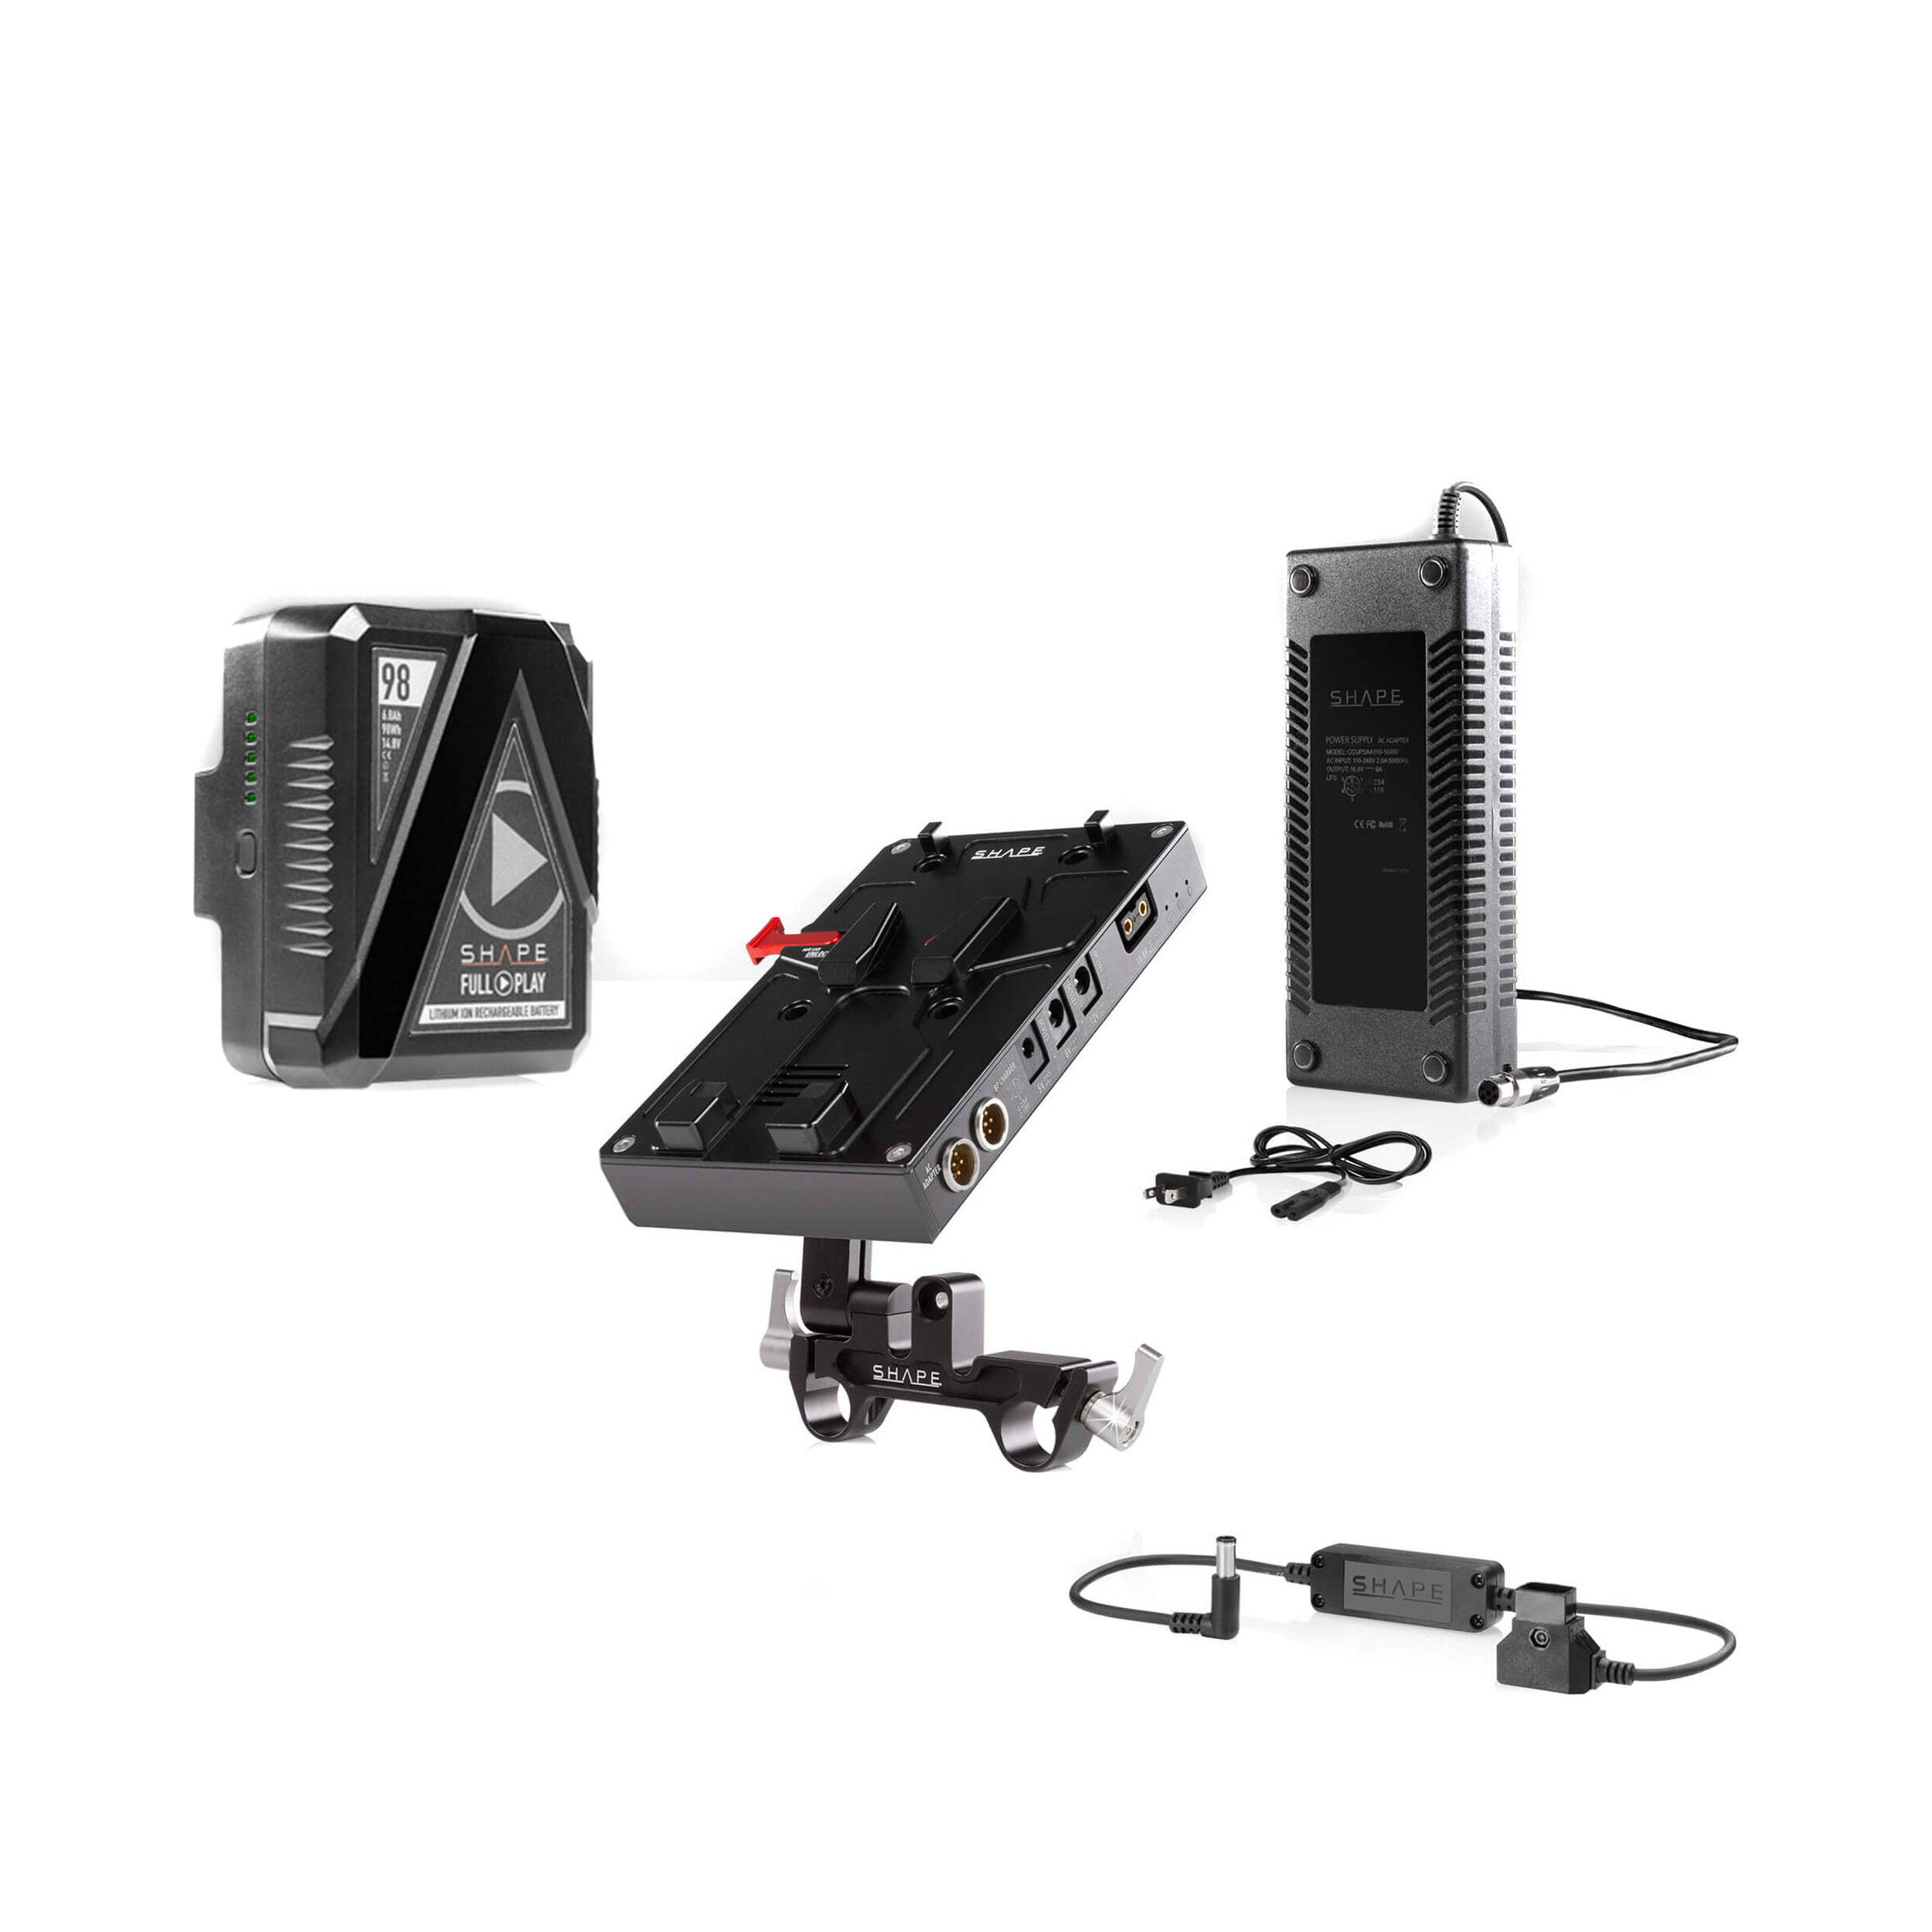 SHAPE 98Wh V-Mount Battery and J-Box Power Kit for Sony PXW-FX9